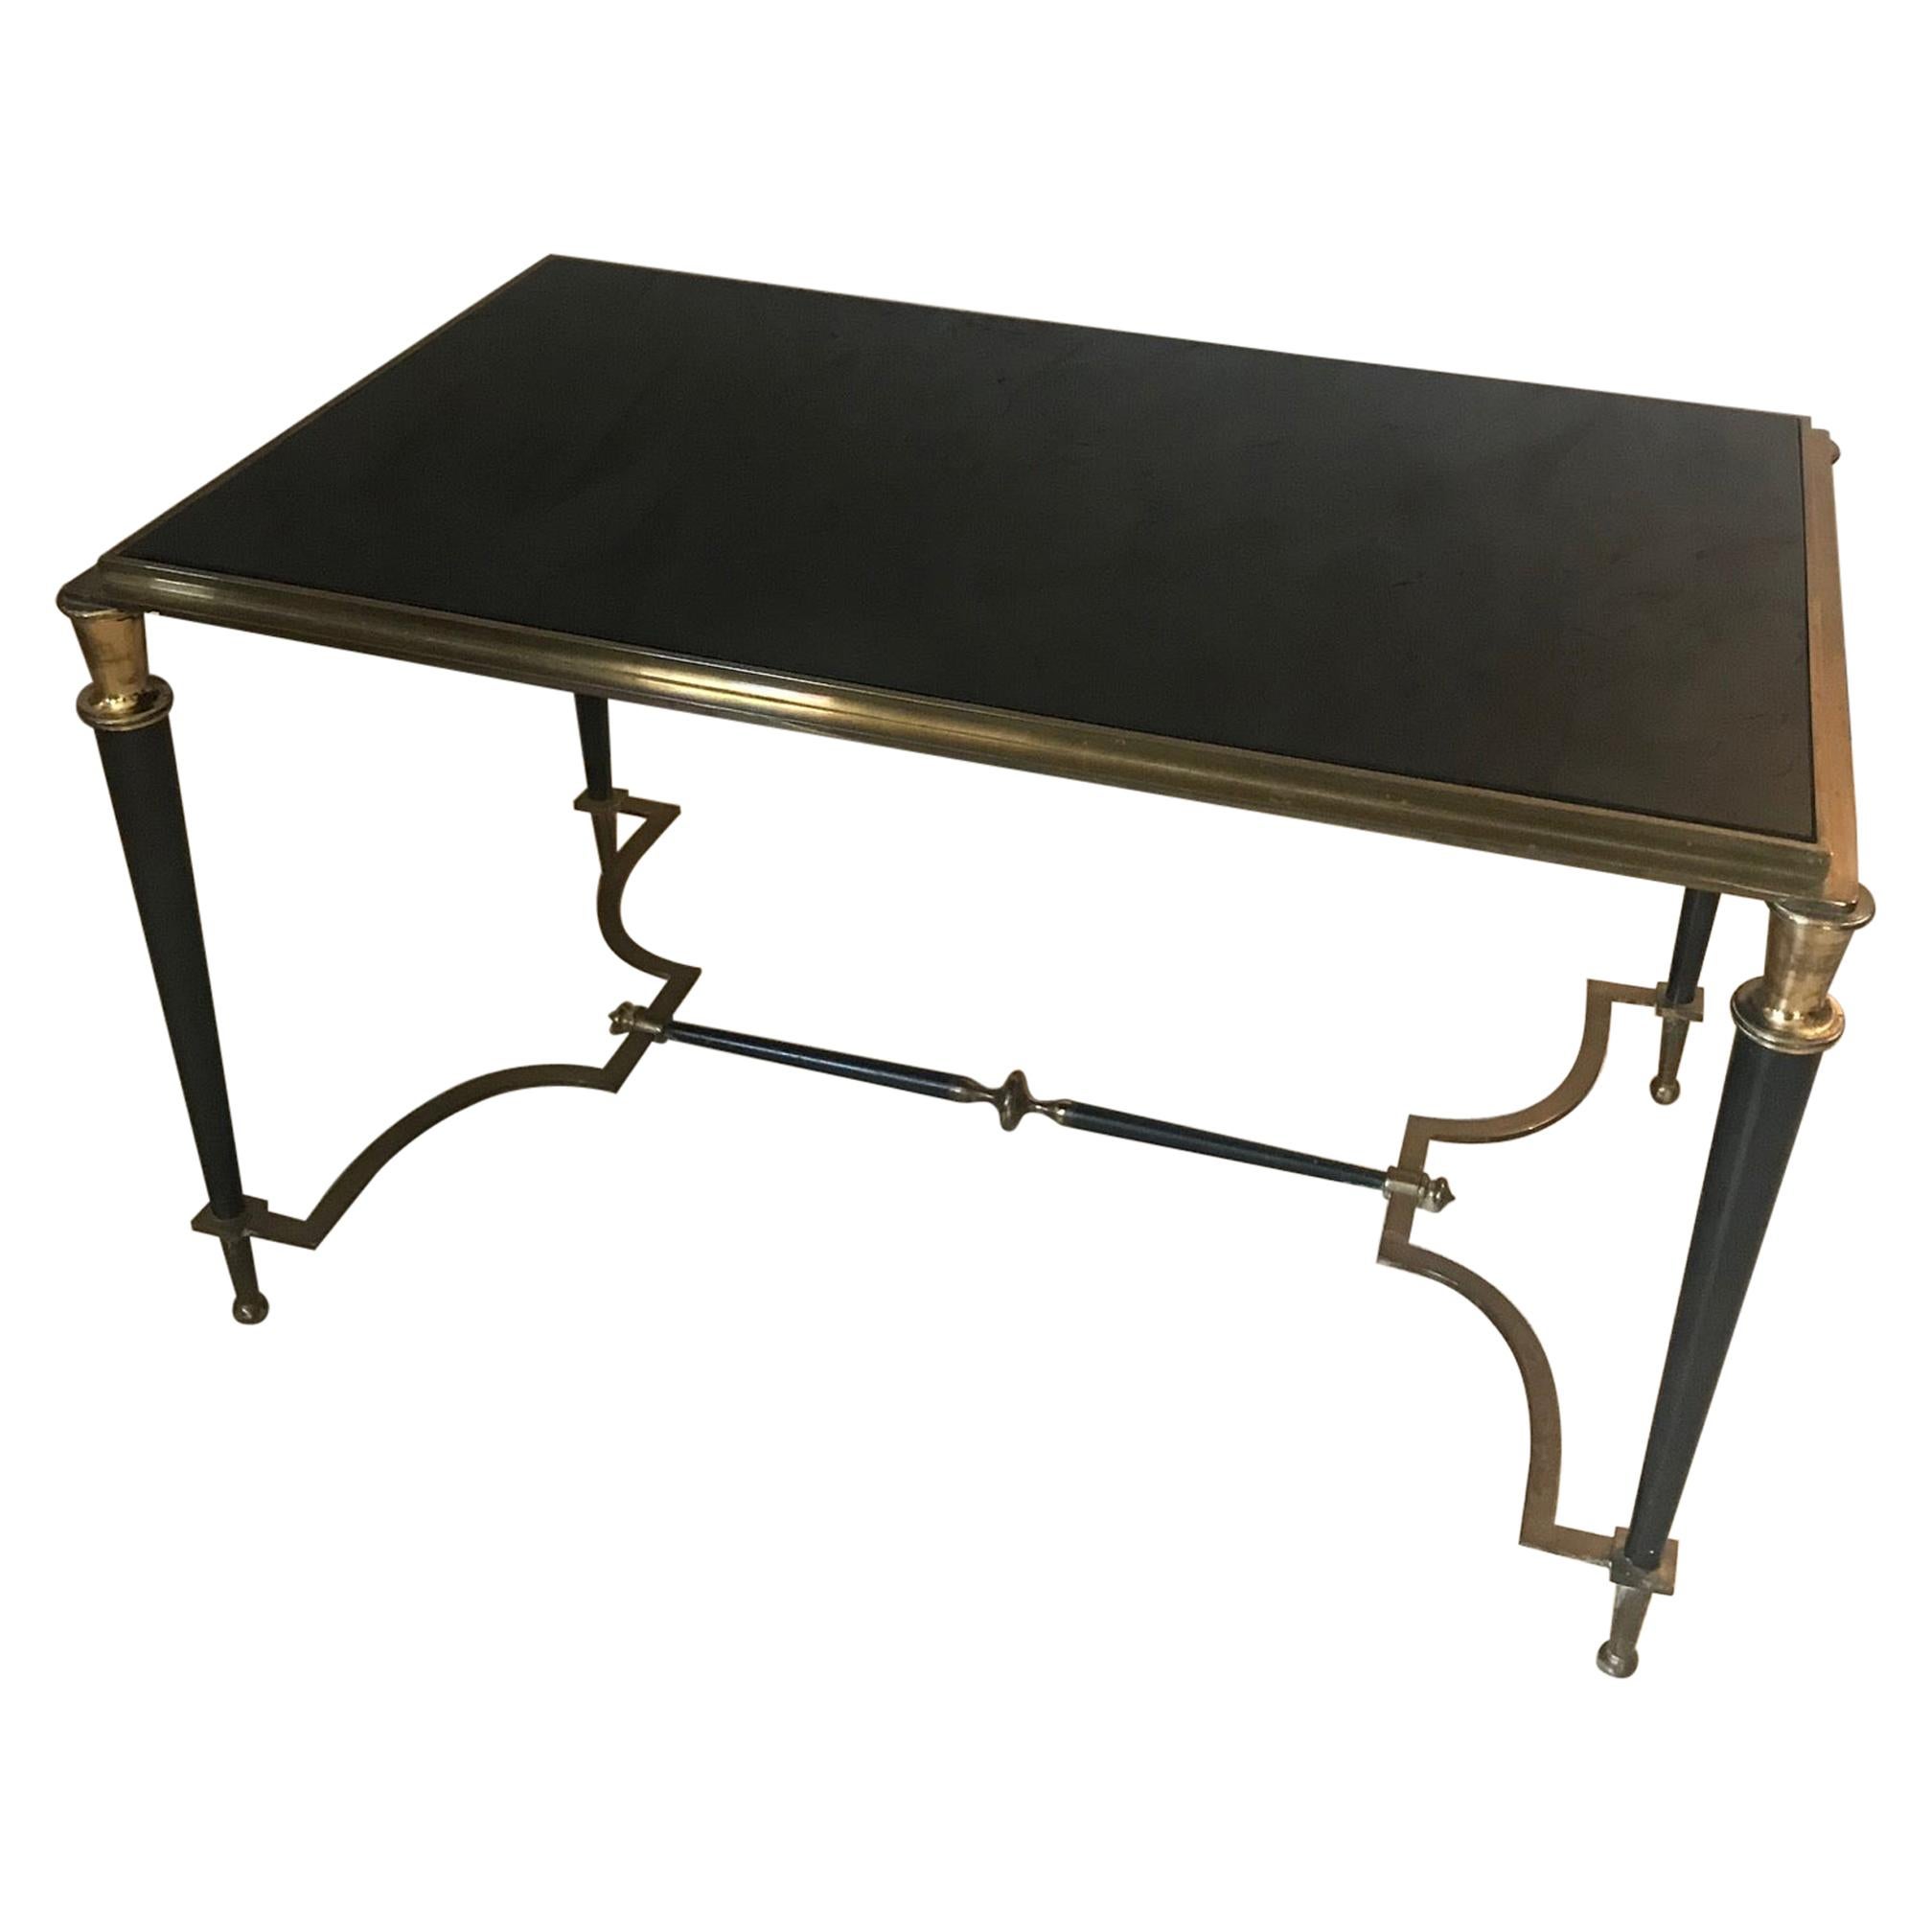 20th Century Maison Baguès Style Brass and Black Glass Coffee Table, 1950s For Sale